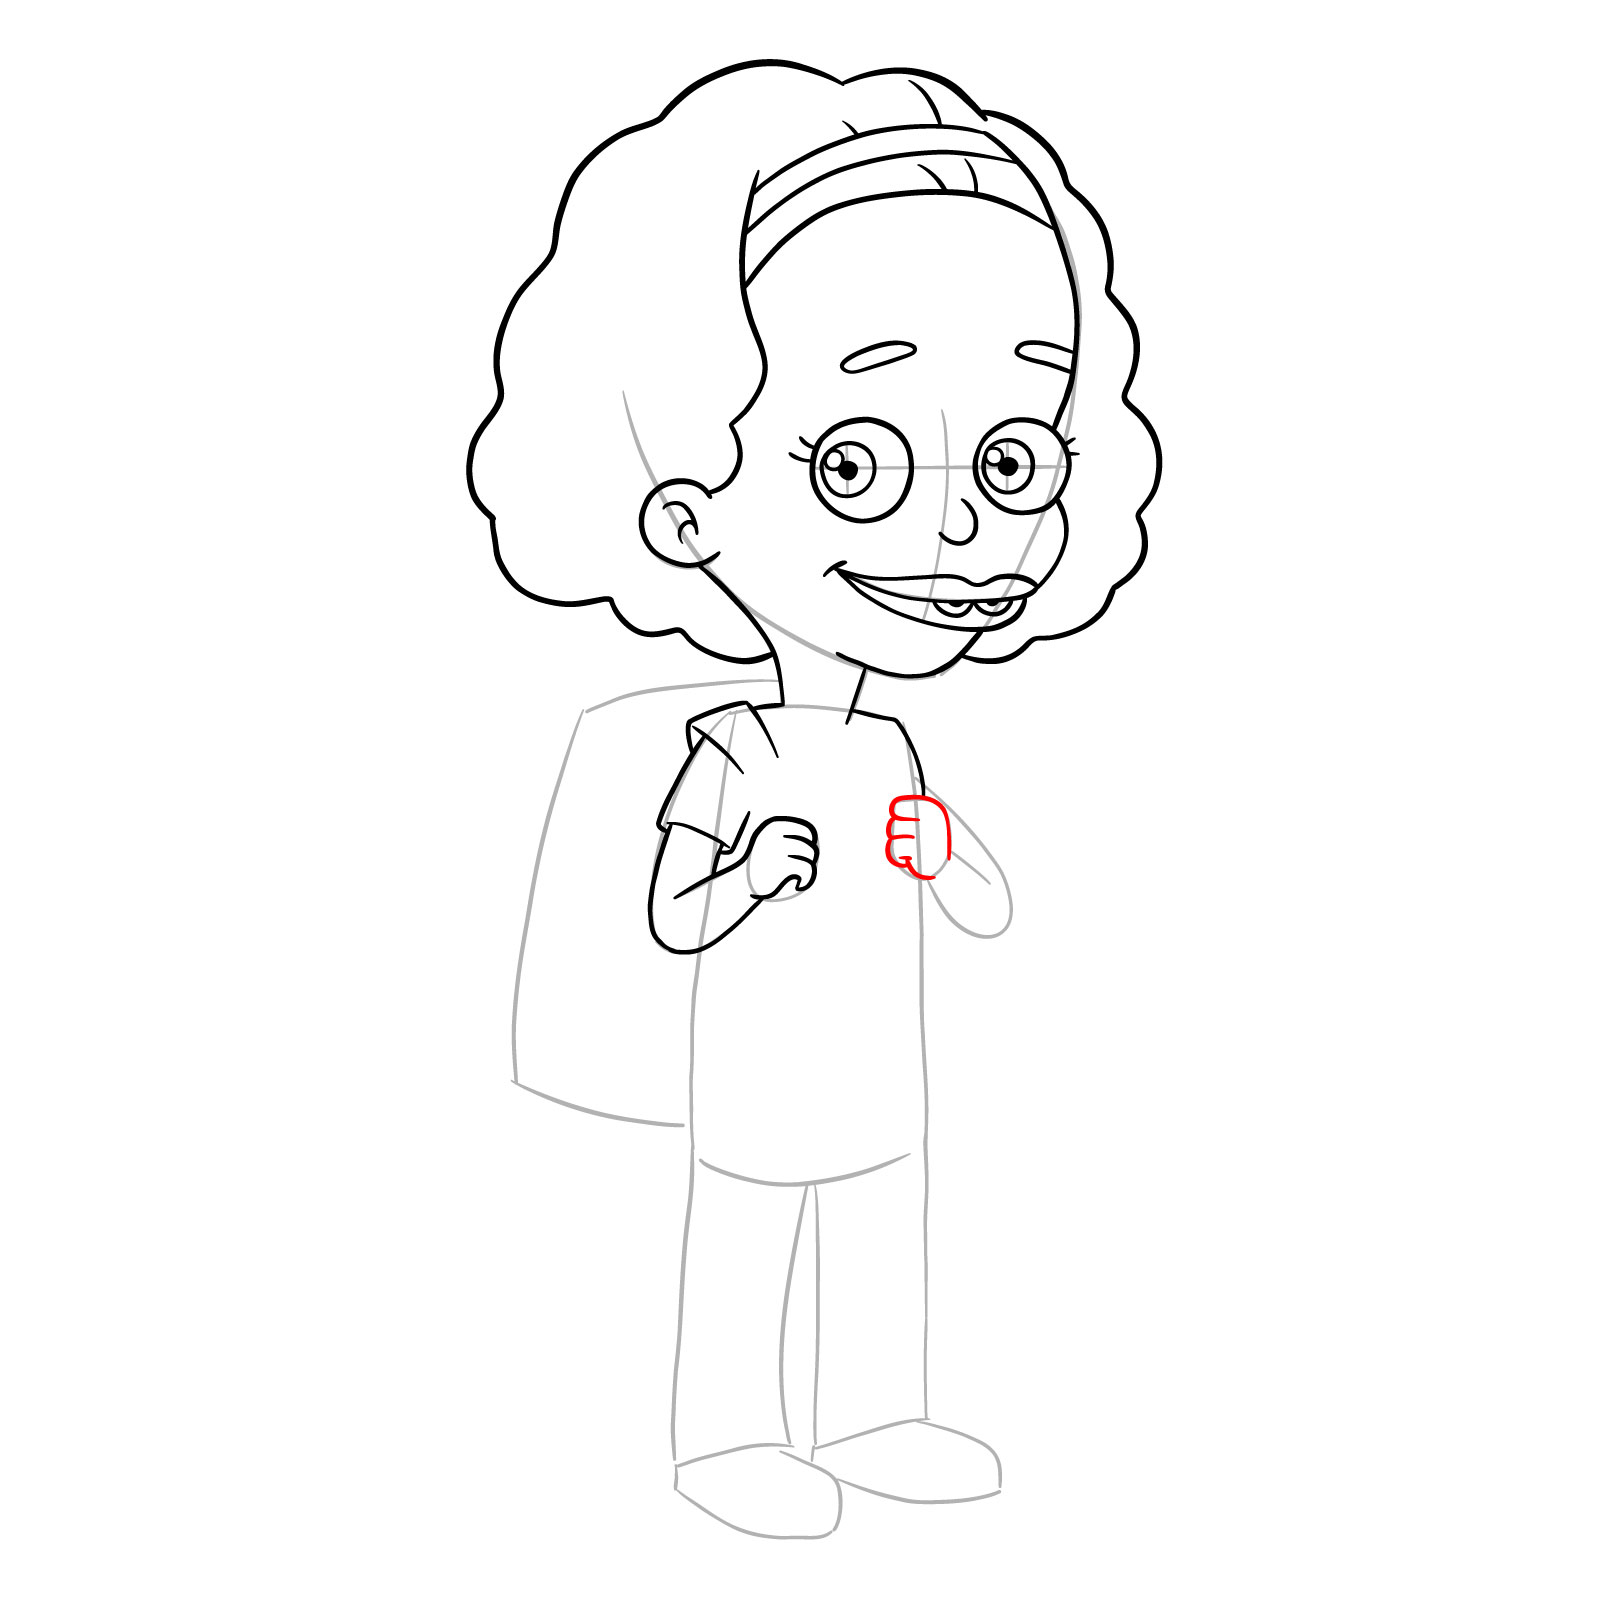 How to draw Missy from Big Mouth - step 16